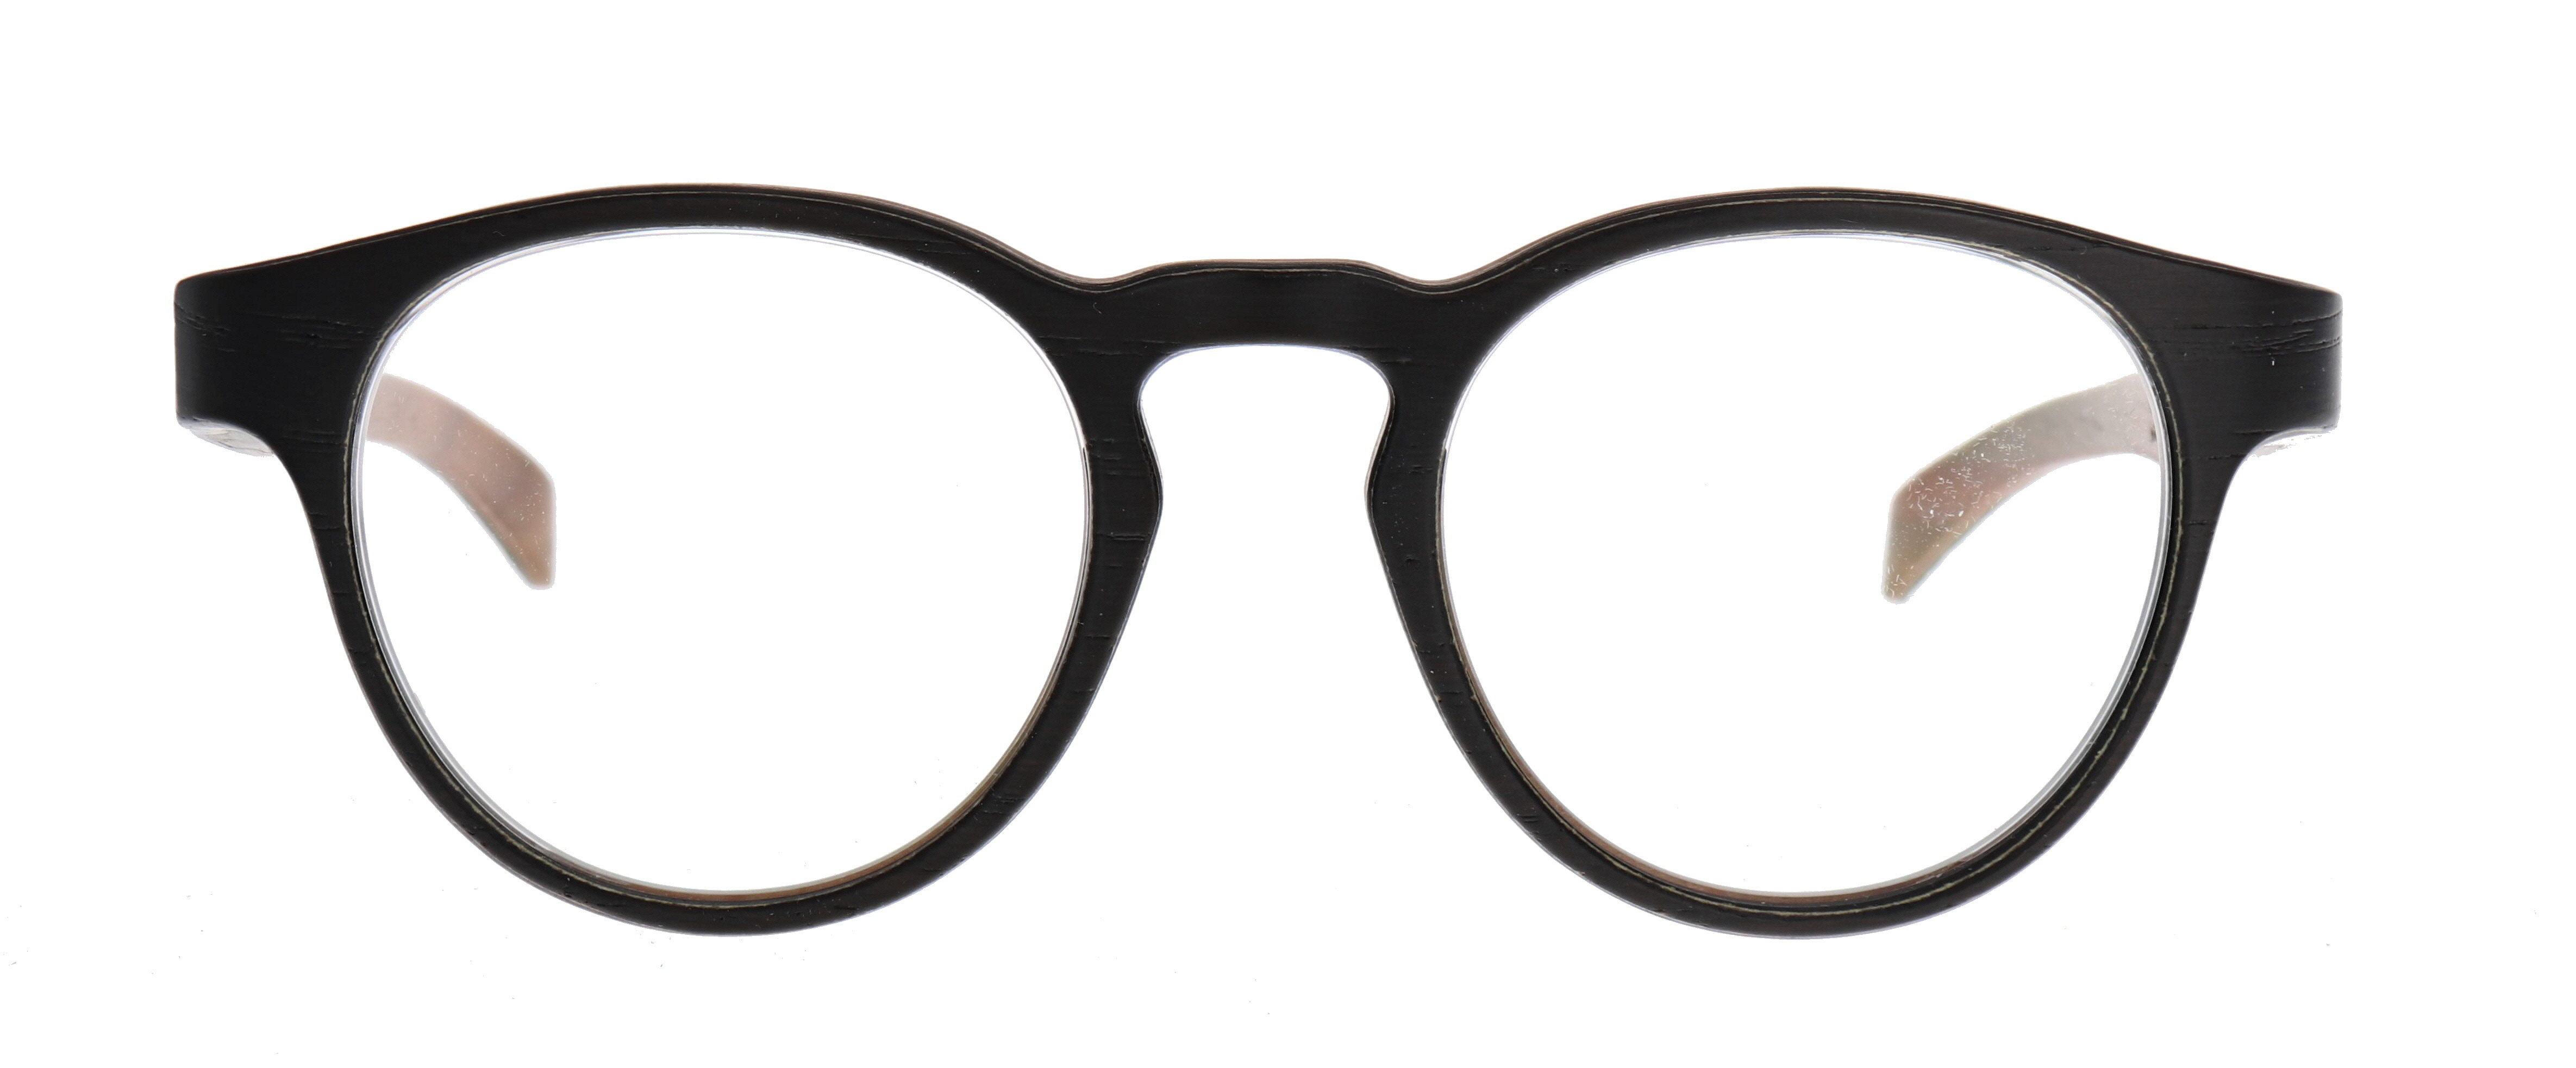 Rolf Spectacles Cameo